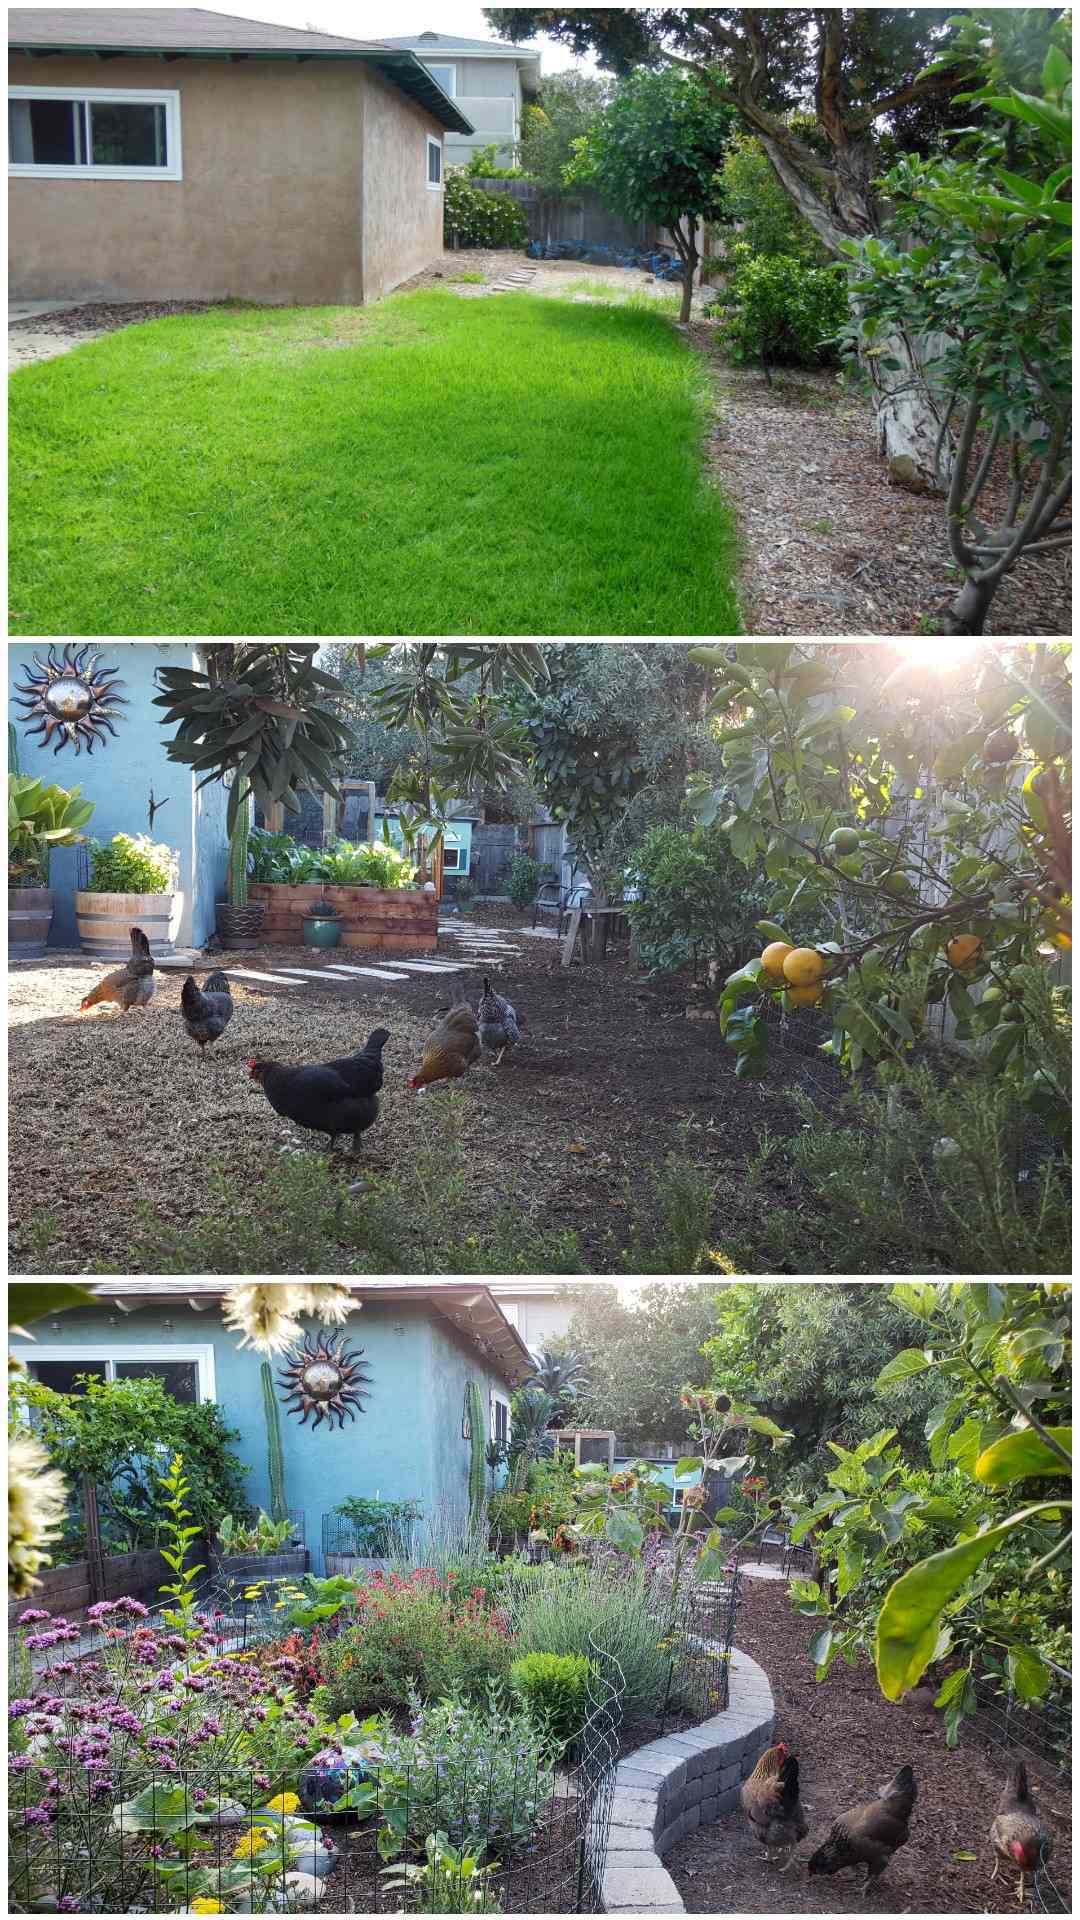 Three part image collage of the backyard facing the coop garden. The first image shows the yard shortly after purchasing the home, there is a lot of grass and dirt and a few trees along the perimeter of the yard. The second image shows the same part of the yard after the chicken coop and coop garden had been built. there are five chickens picking around the dying grass in the foreground. In the distance the coop garden beds are visible as well as the chicken coop itself. The third image shows the same as before, yet the grass has been removed and a large stone lined island has been constructed. In the middle of the stone island there are many perennial and annual flowers growing while the chickens are outside of the area picking around at the ground. Some of the patio garden is visible as there is a vine growing along the trellis on the backside of the garden beds. 